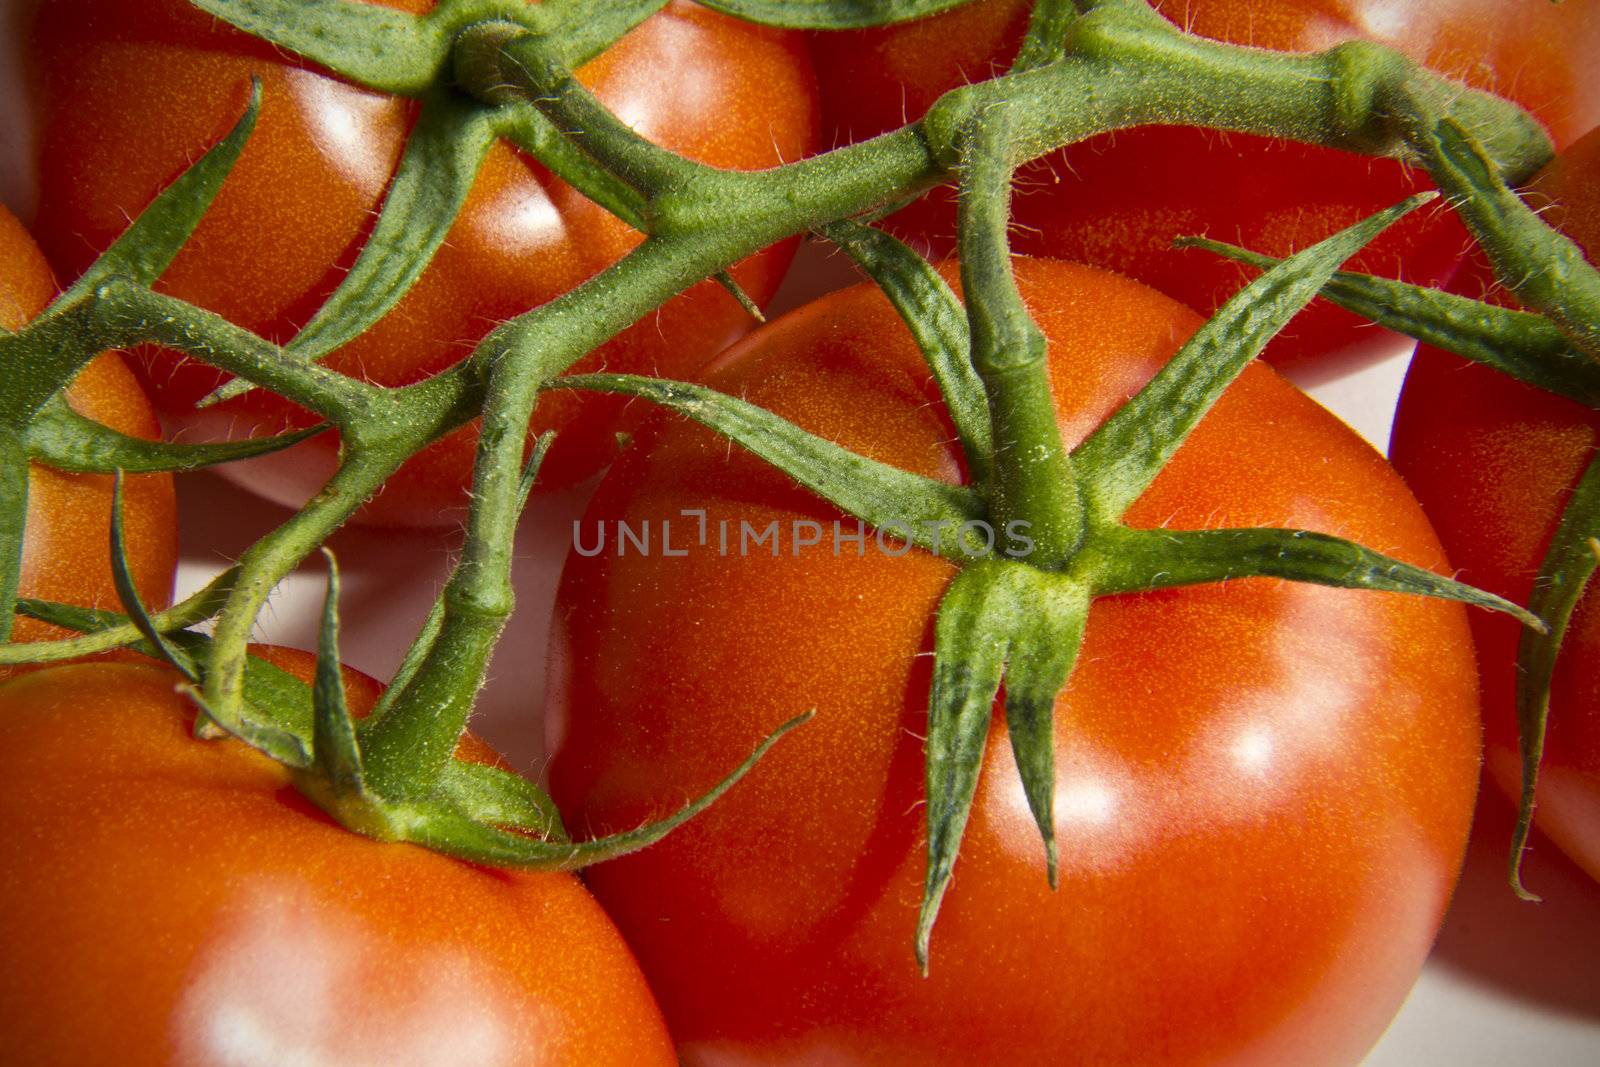 Looking down on some juicy looking vine tomatoes ready to eat